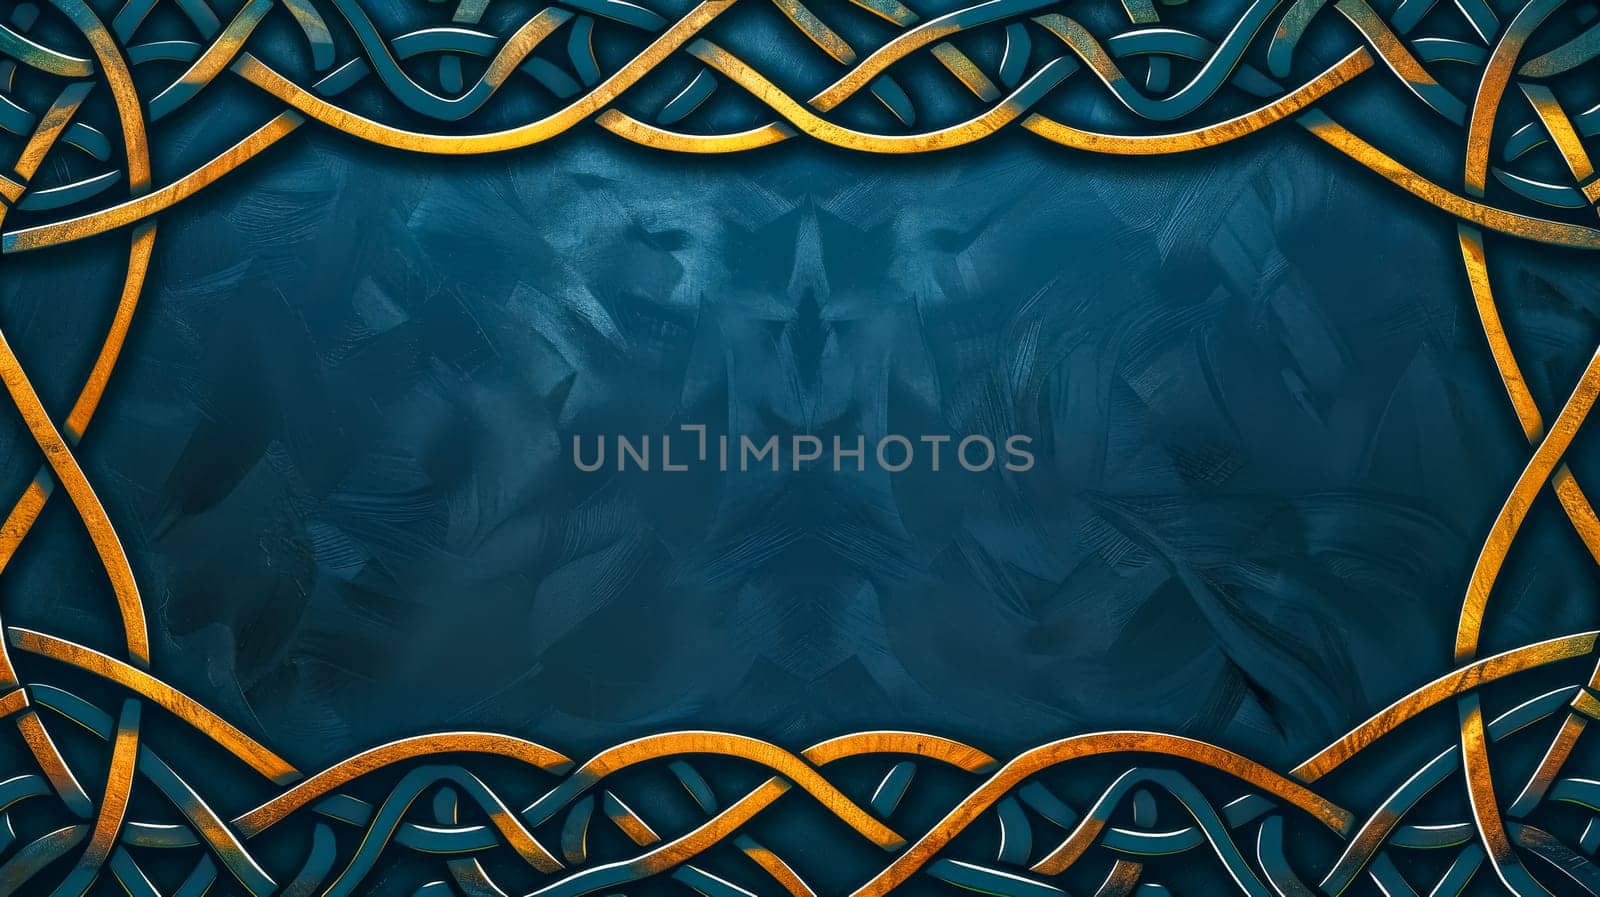 Elegant blue feather background with golden ornate frame by Edophoto